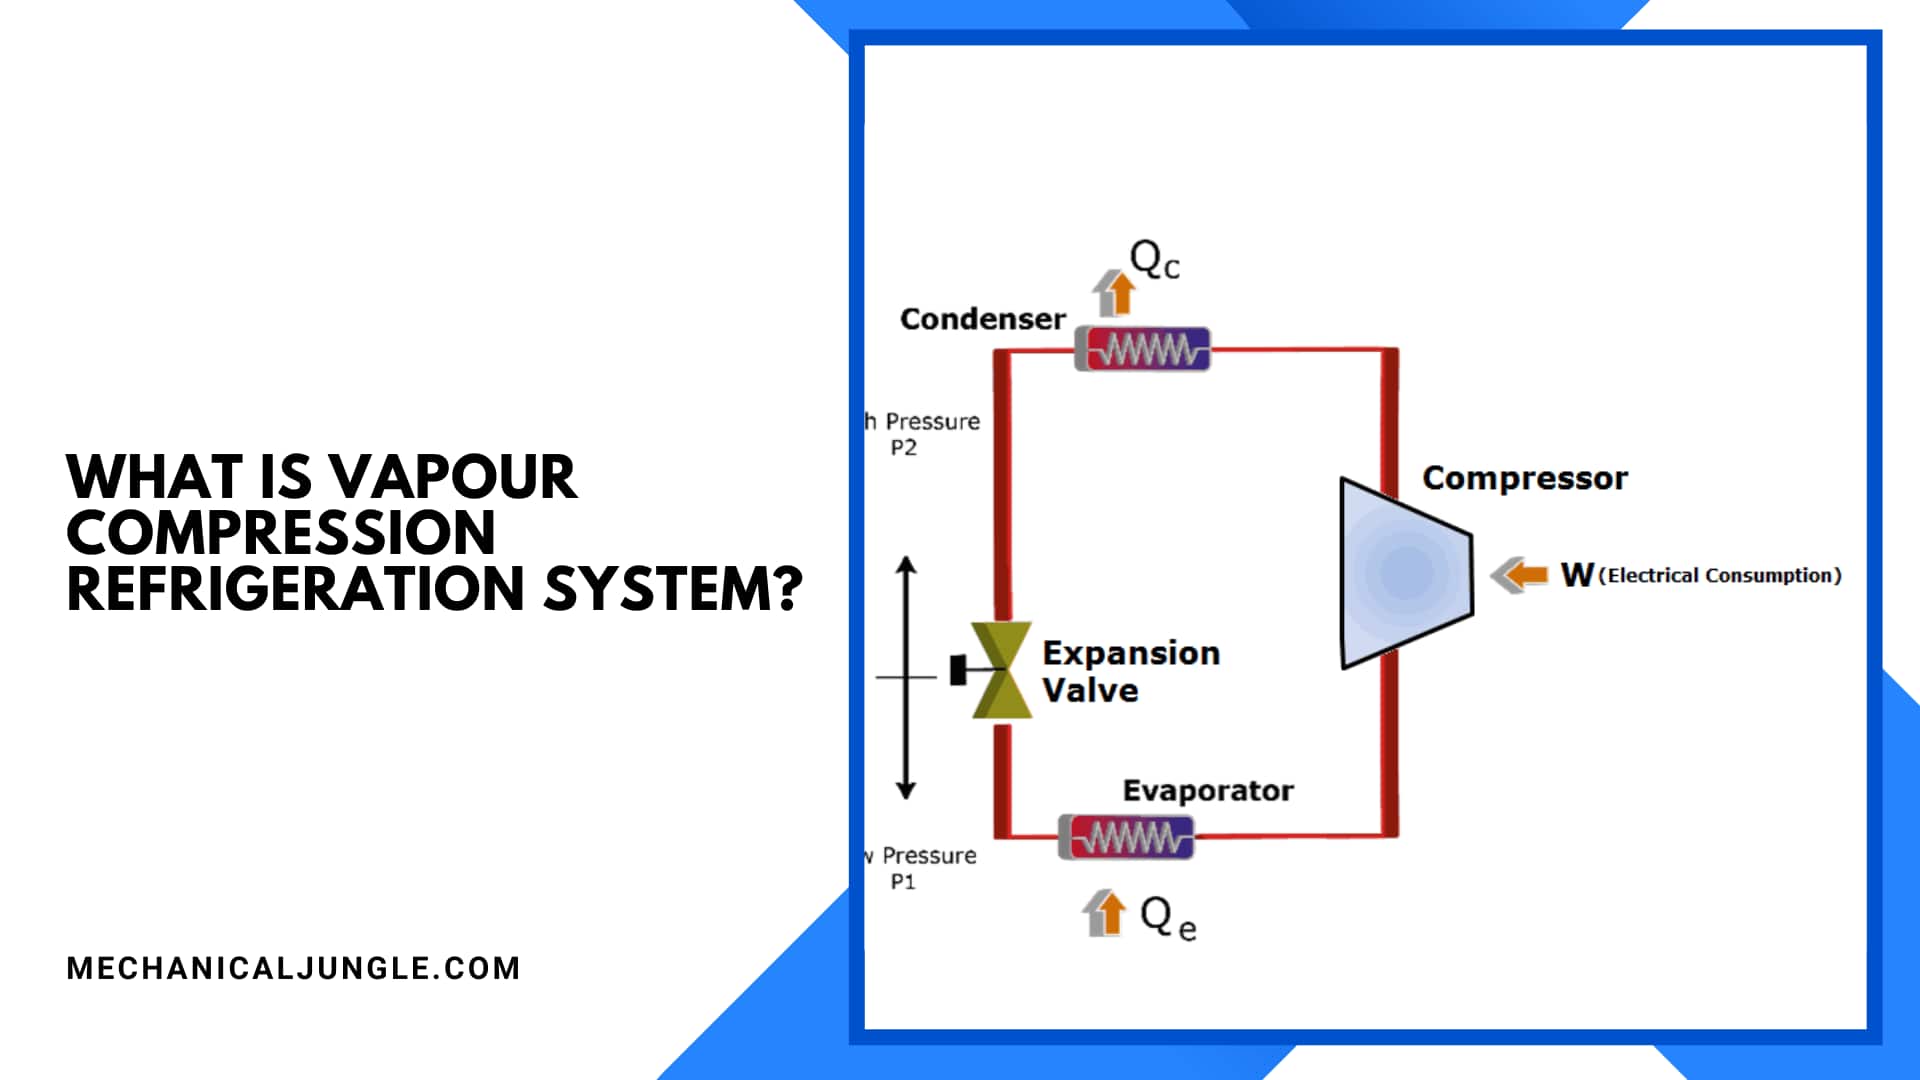 What Is Vapour Compression Refrigeration System?